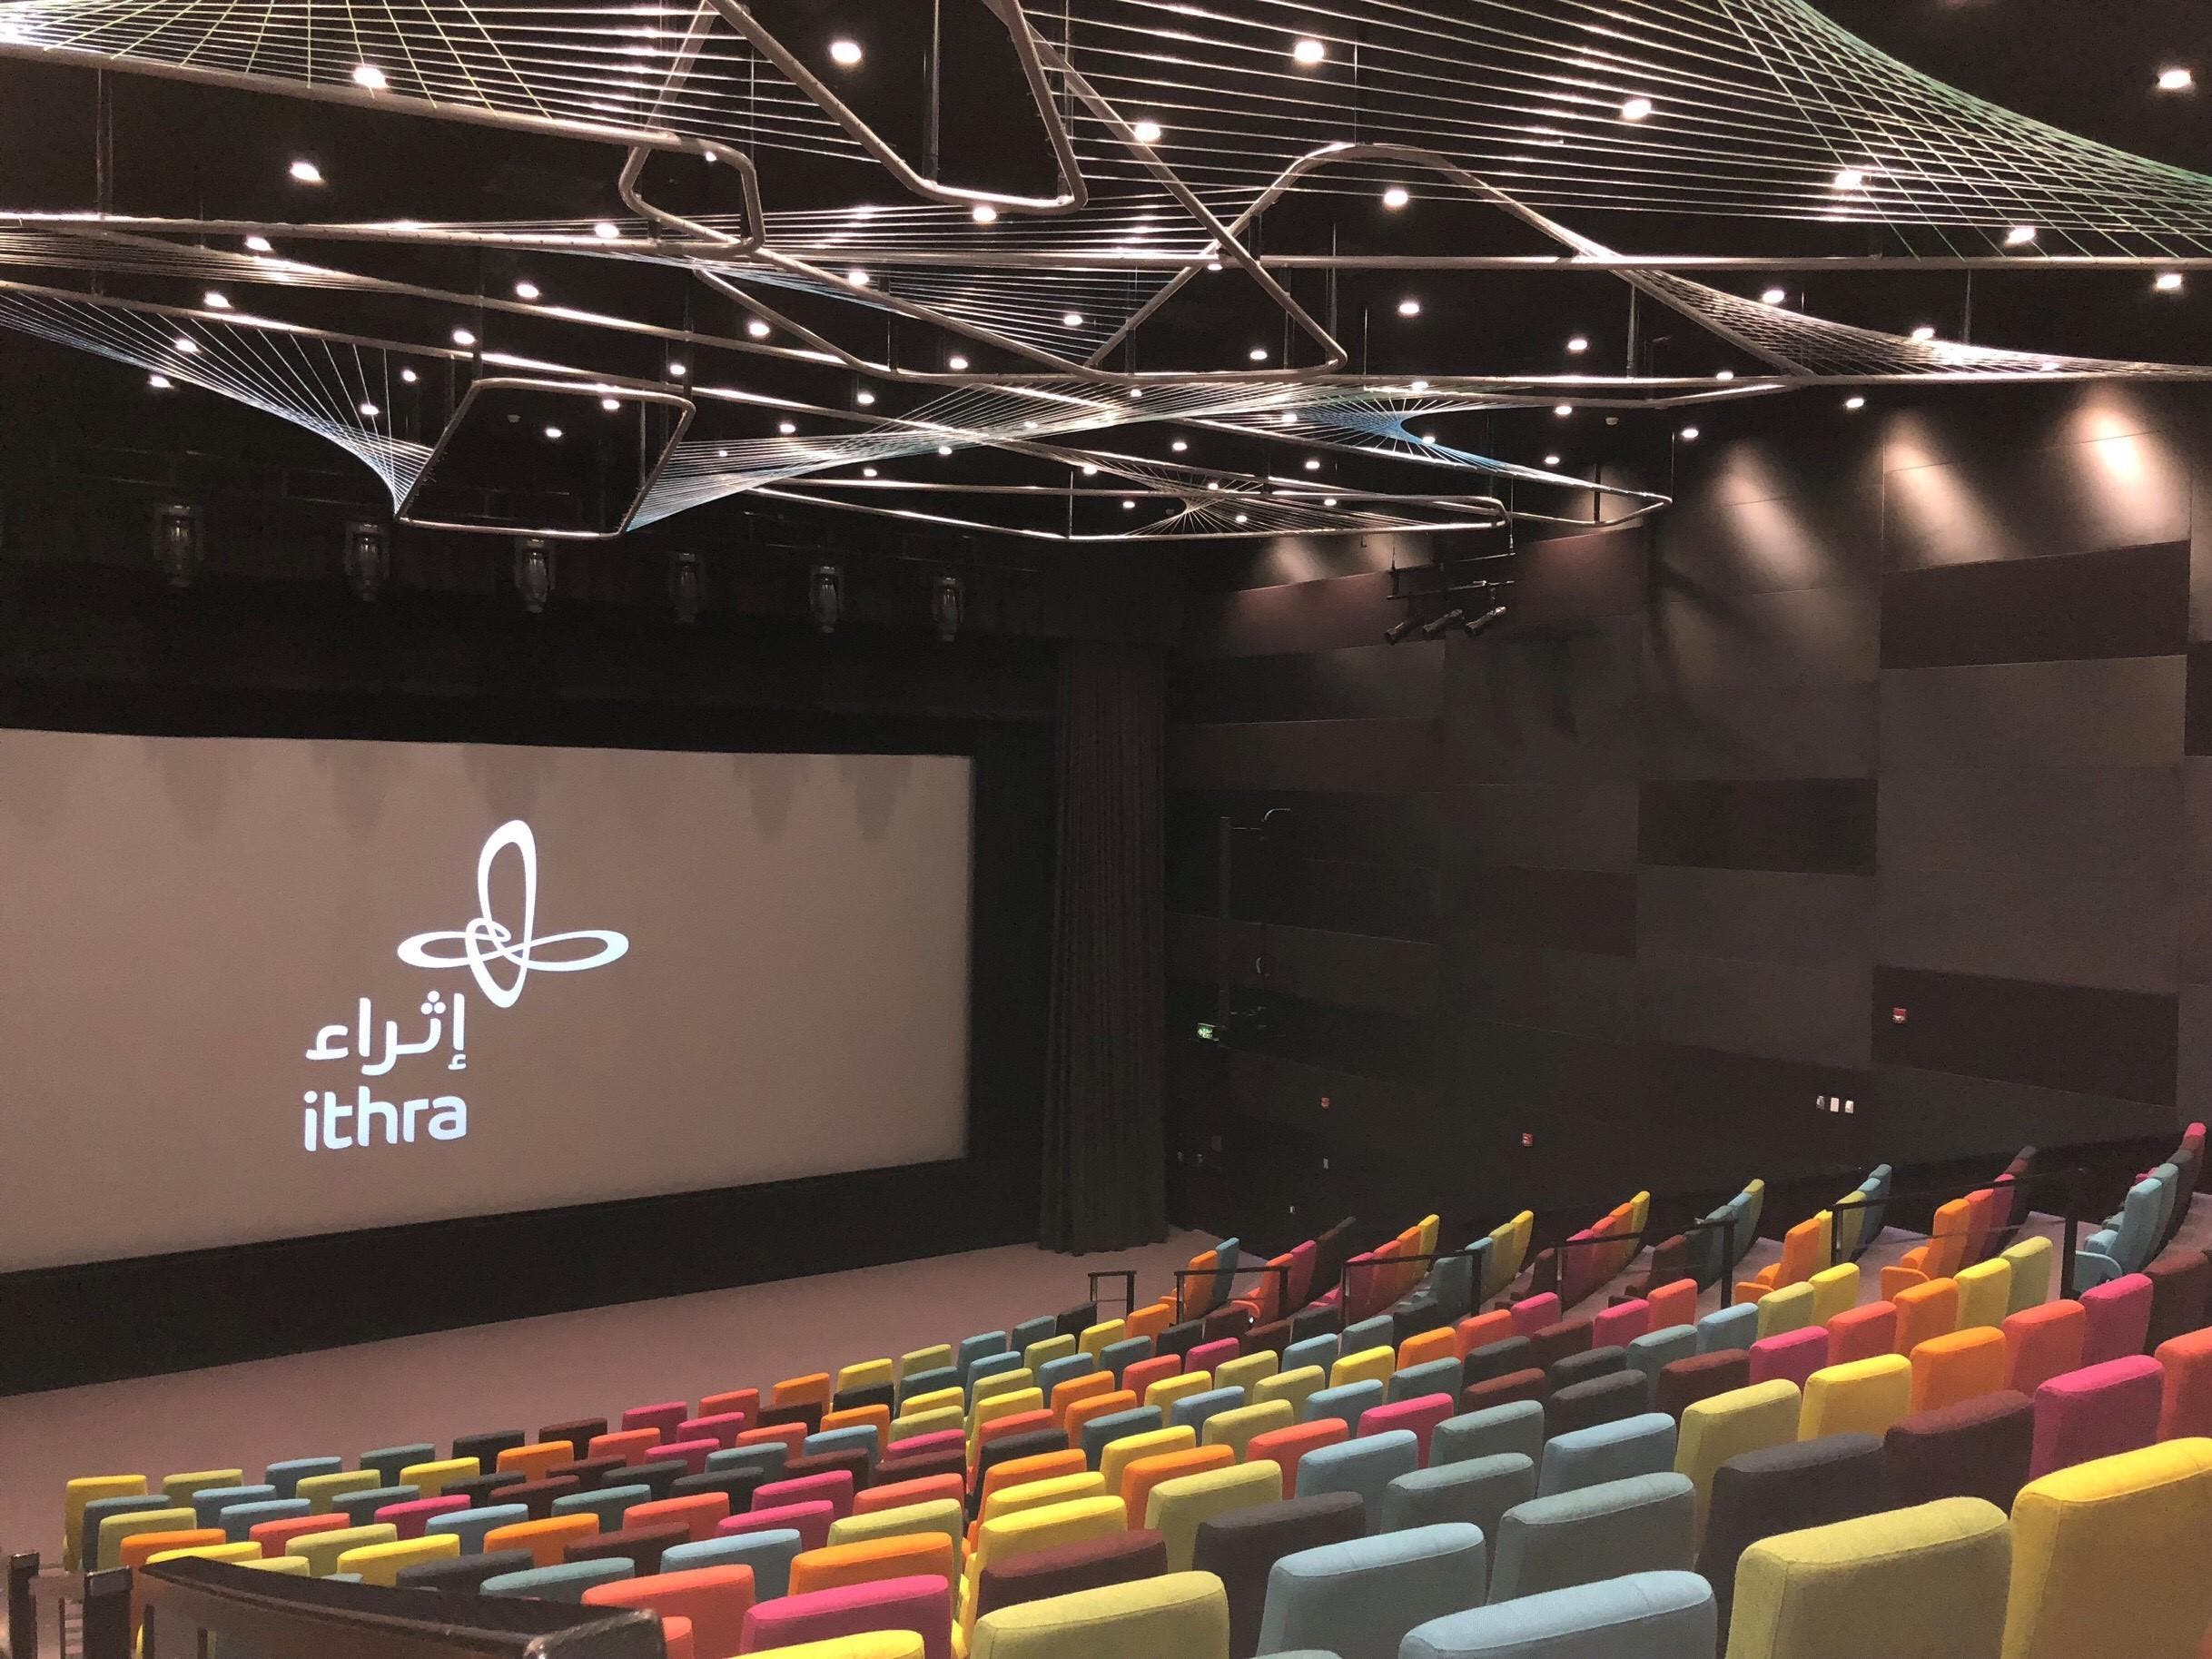 The King Abdulaziz World Cultural Center (Ithra). (Supplied)